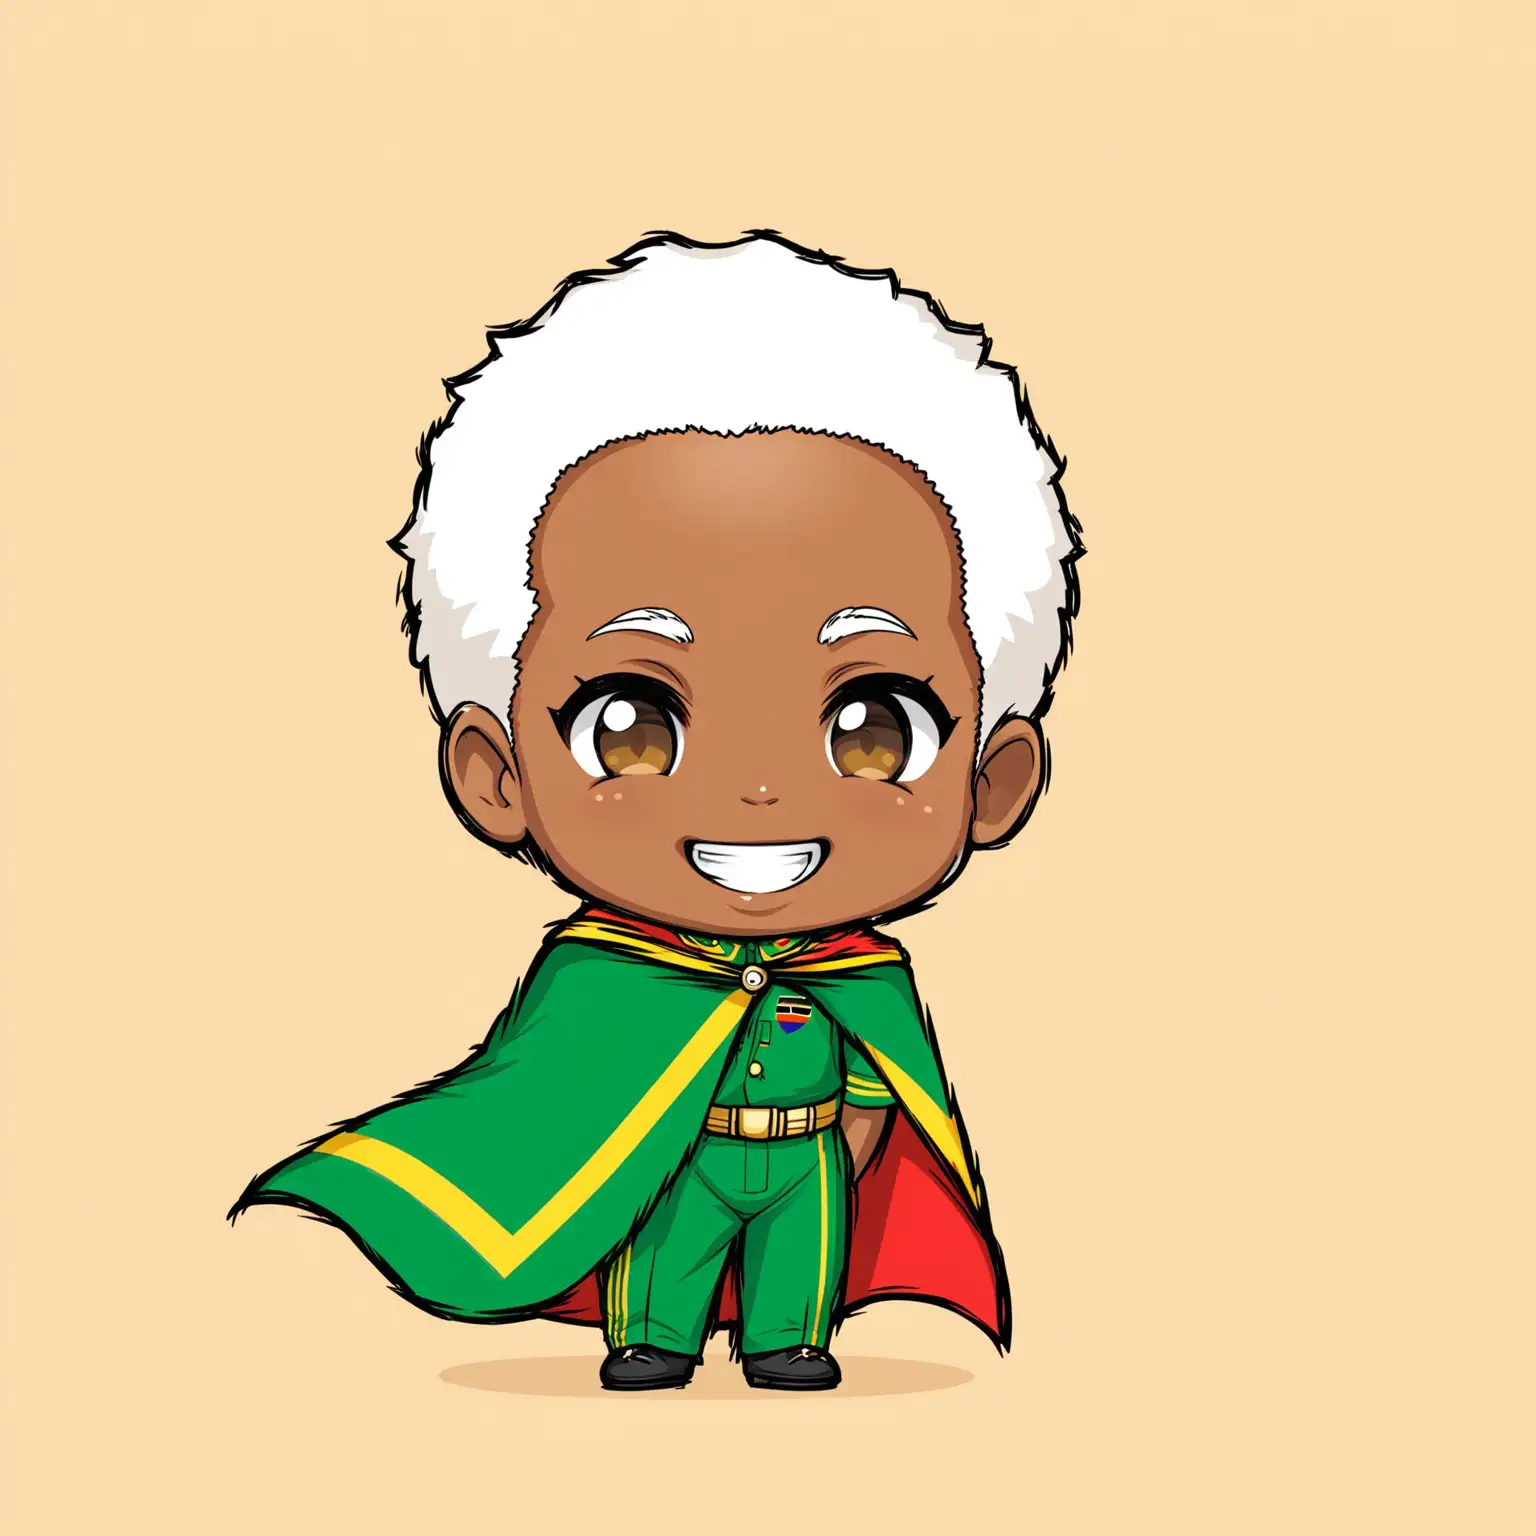 Create a professional illustratration Julius Nyerere in a chibis style, smiling, wearing a tanzania flag cape.
Cartoon style.